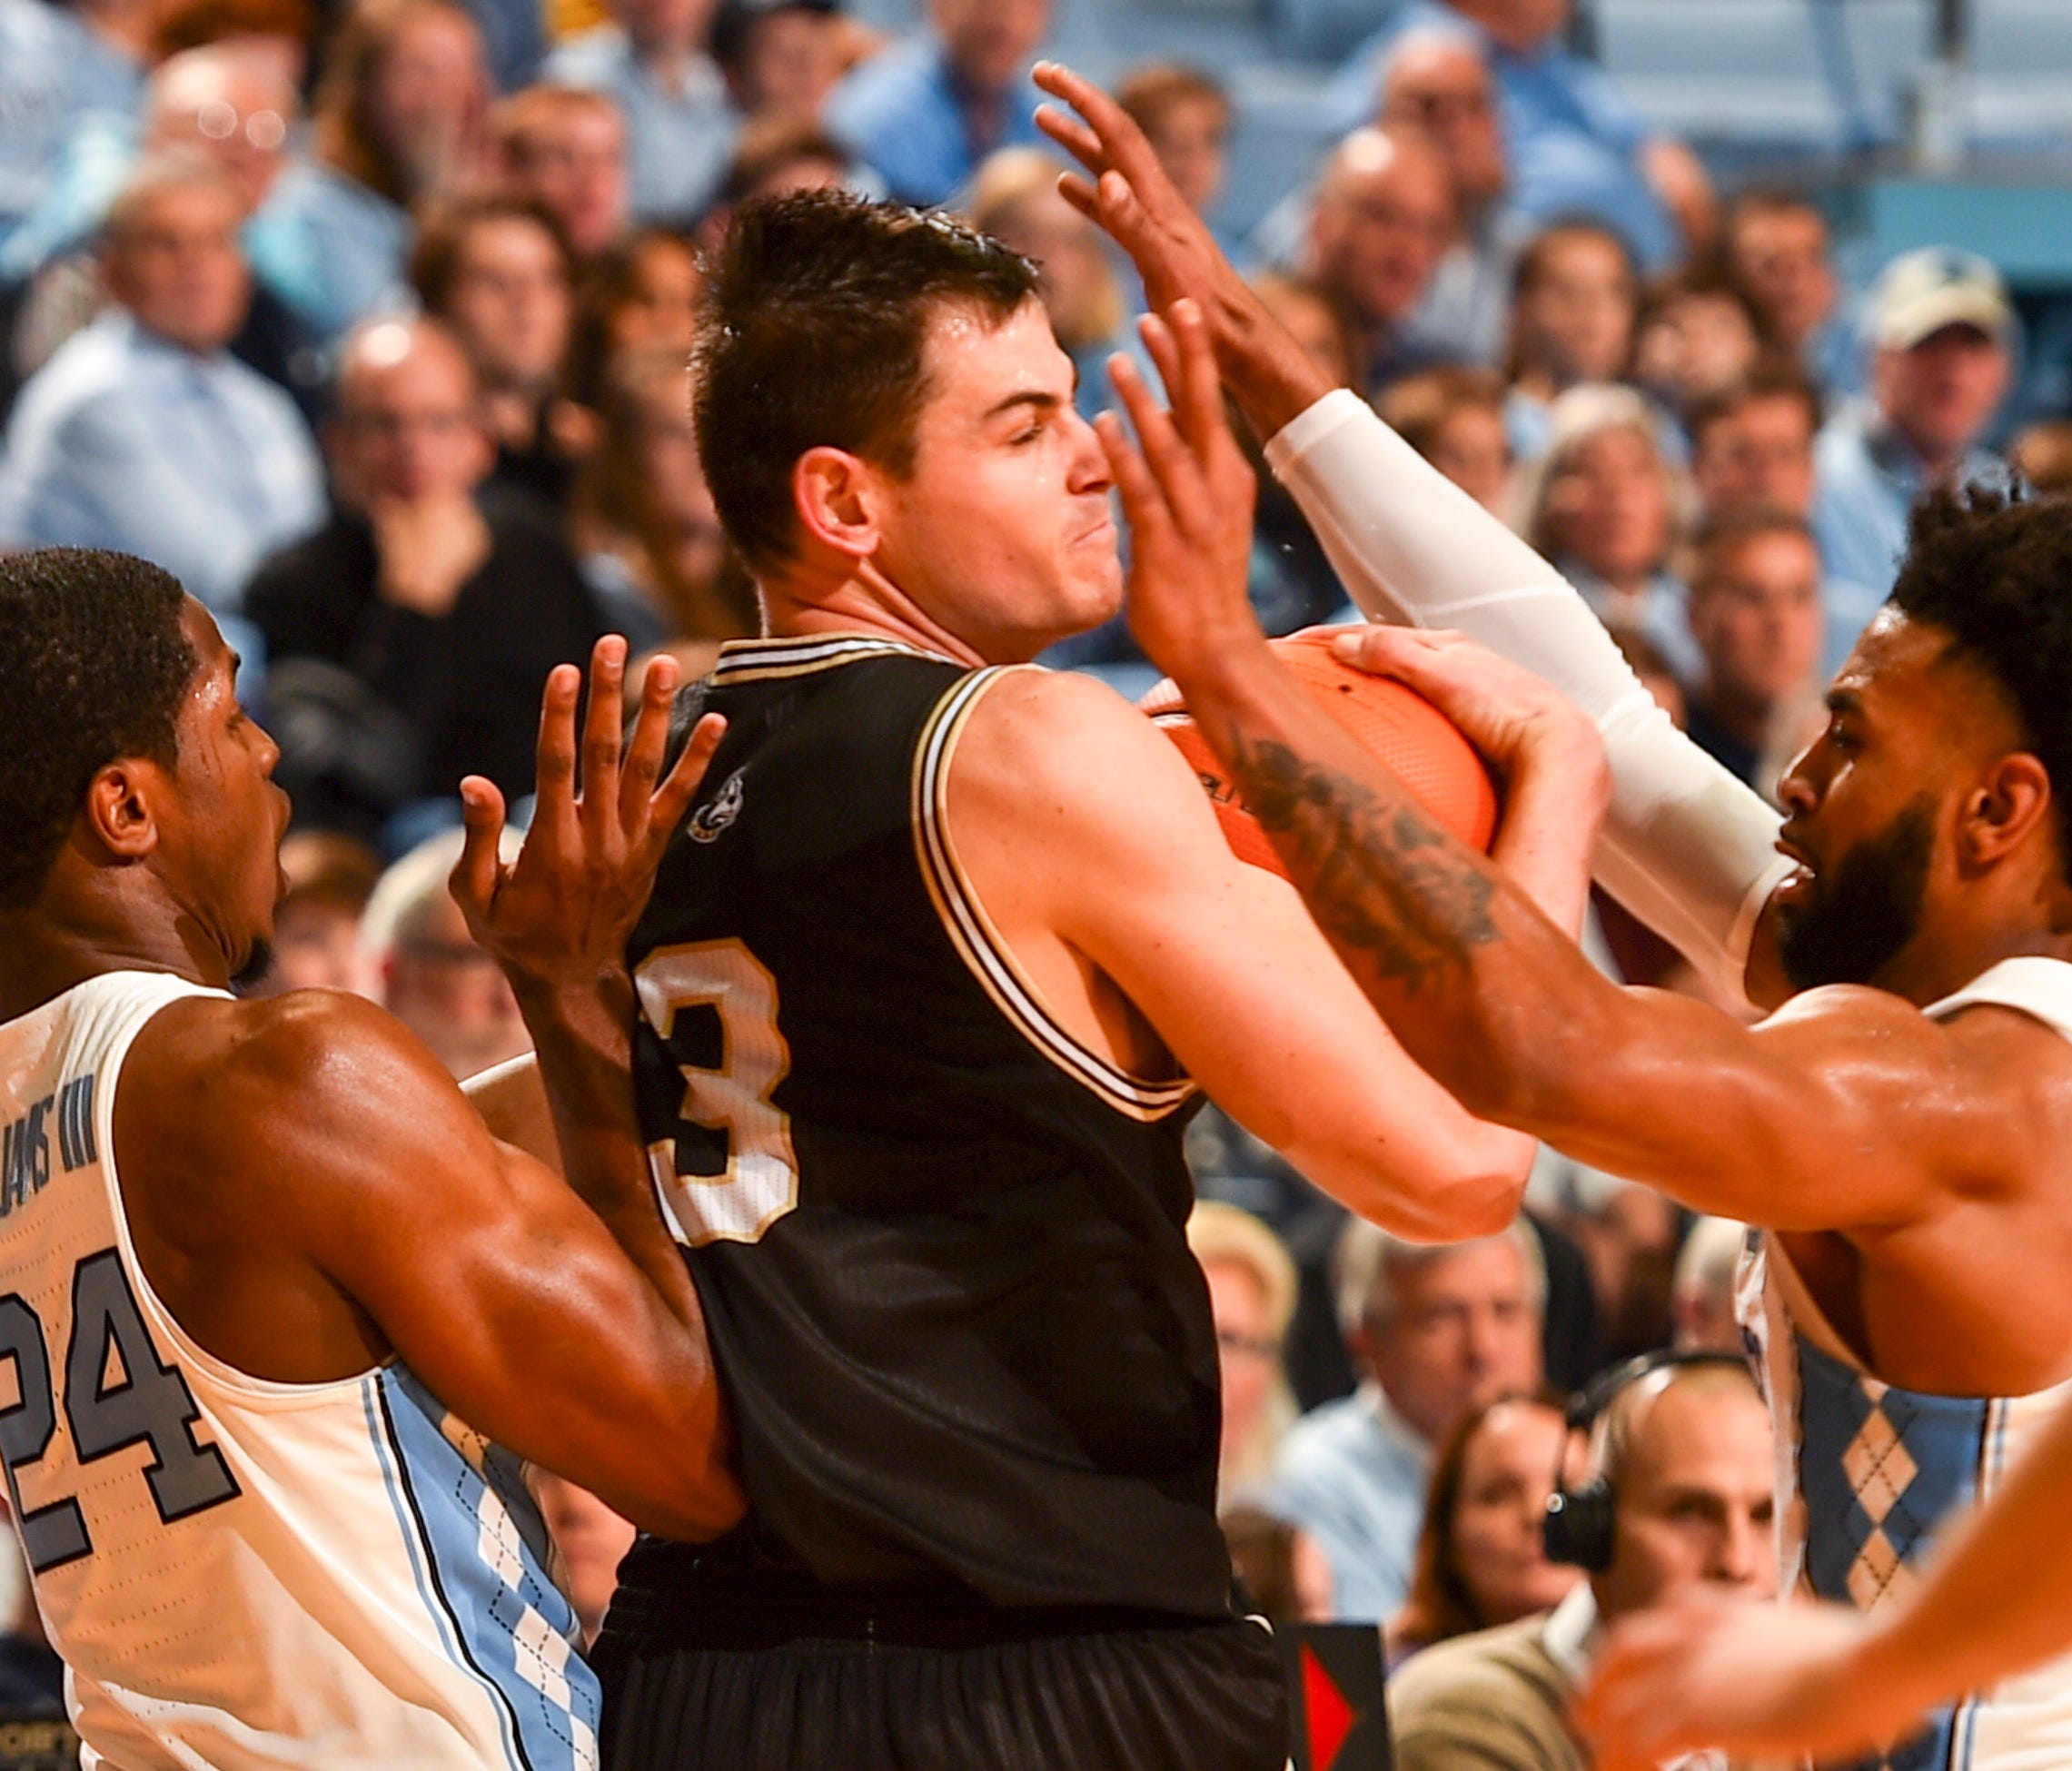 Wofford guard Fletcher Magee is defended by North Carolina guards Kenny Williams, left, and Joel Berry II, right, during the first half at Dean E. Smith Center in Chapel Hill, N.C.